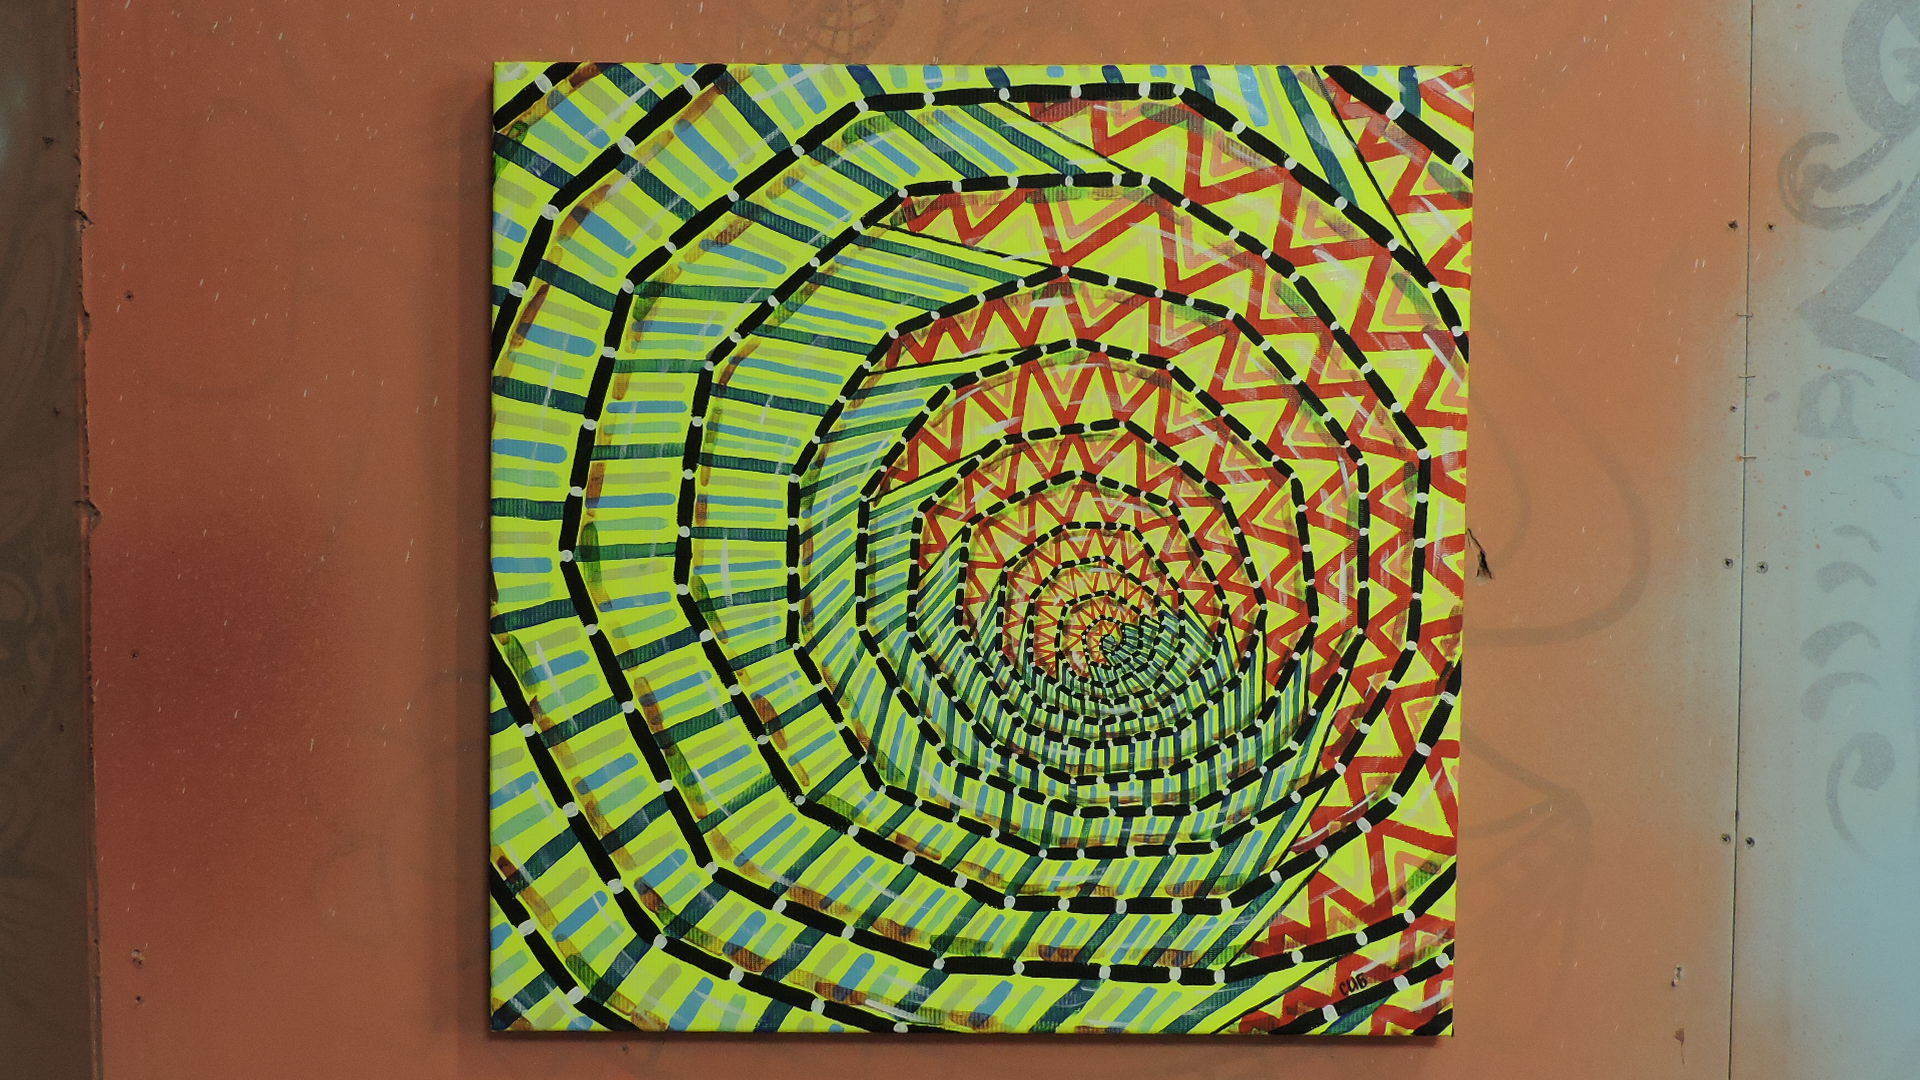 On the canvas painted a bright spiral on a fluorescent yellow background